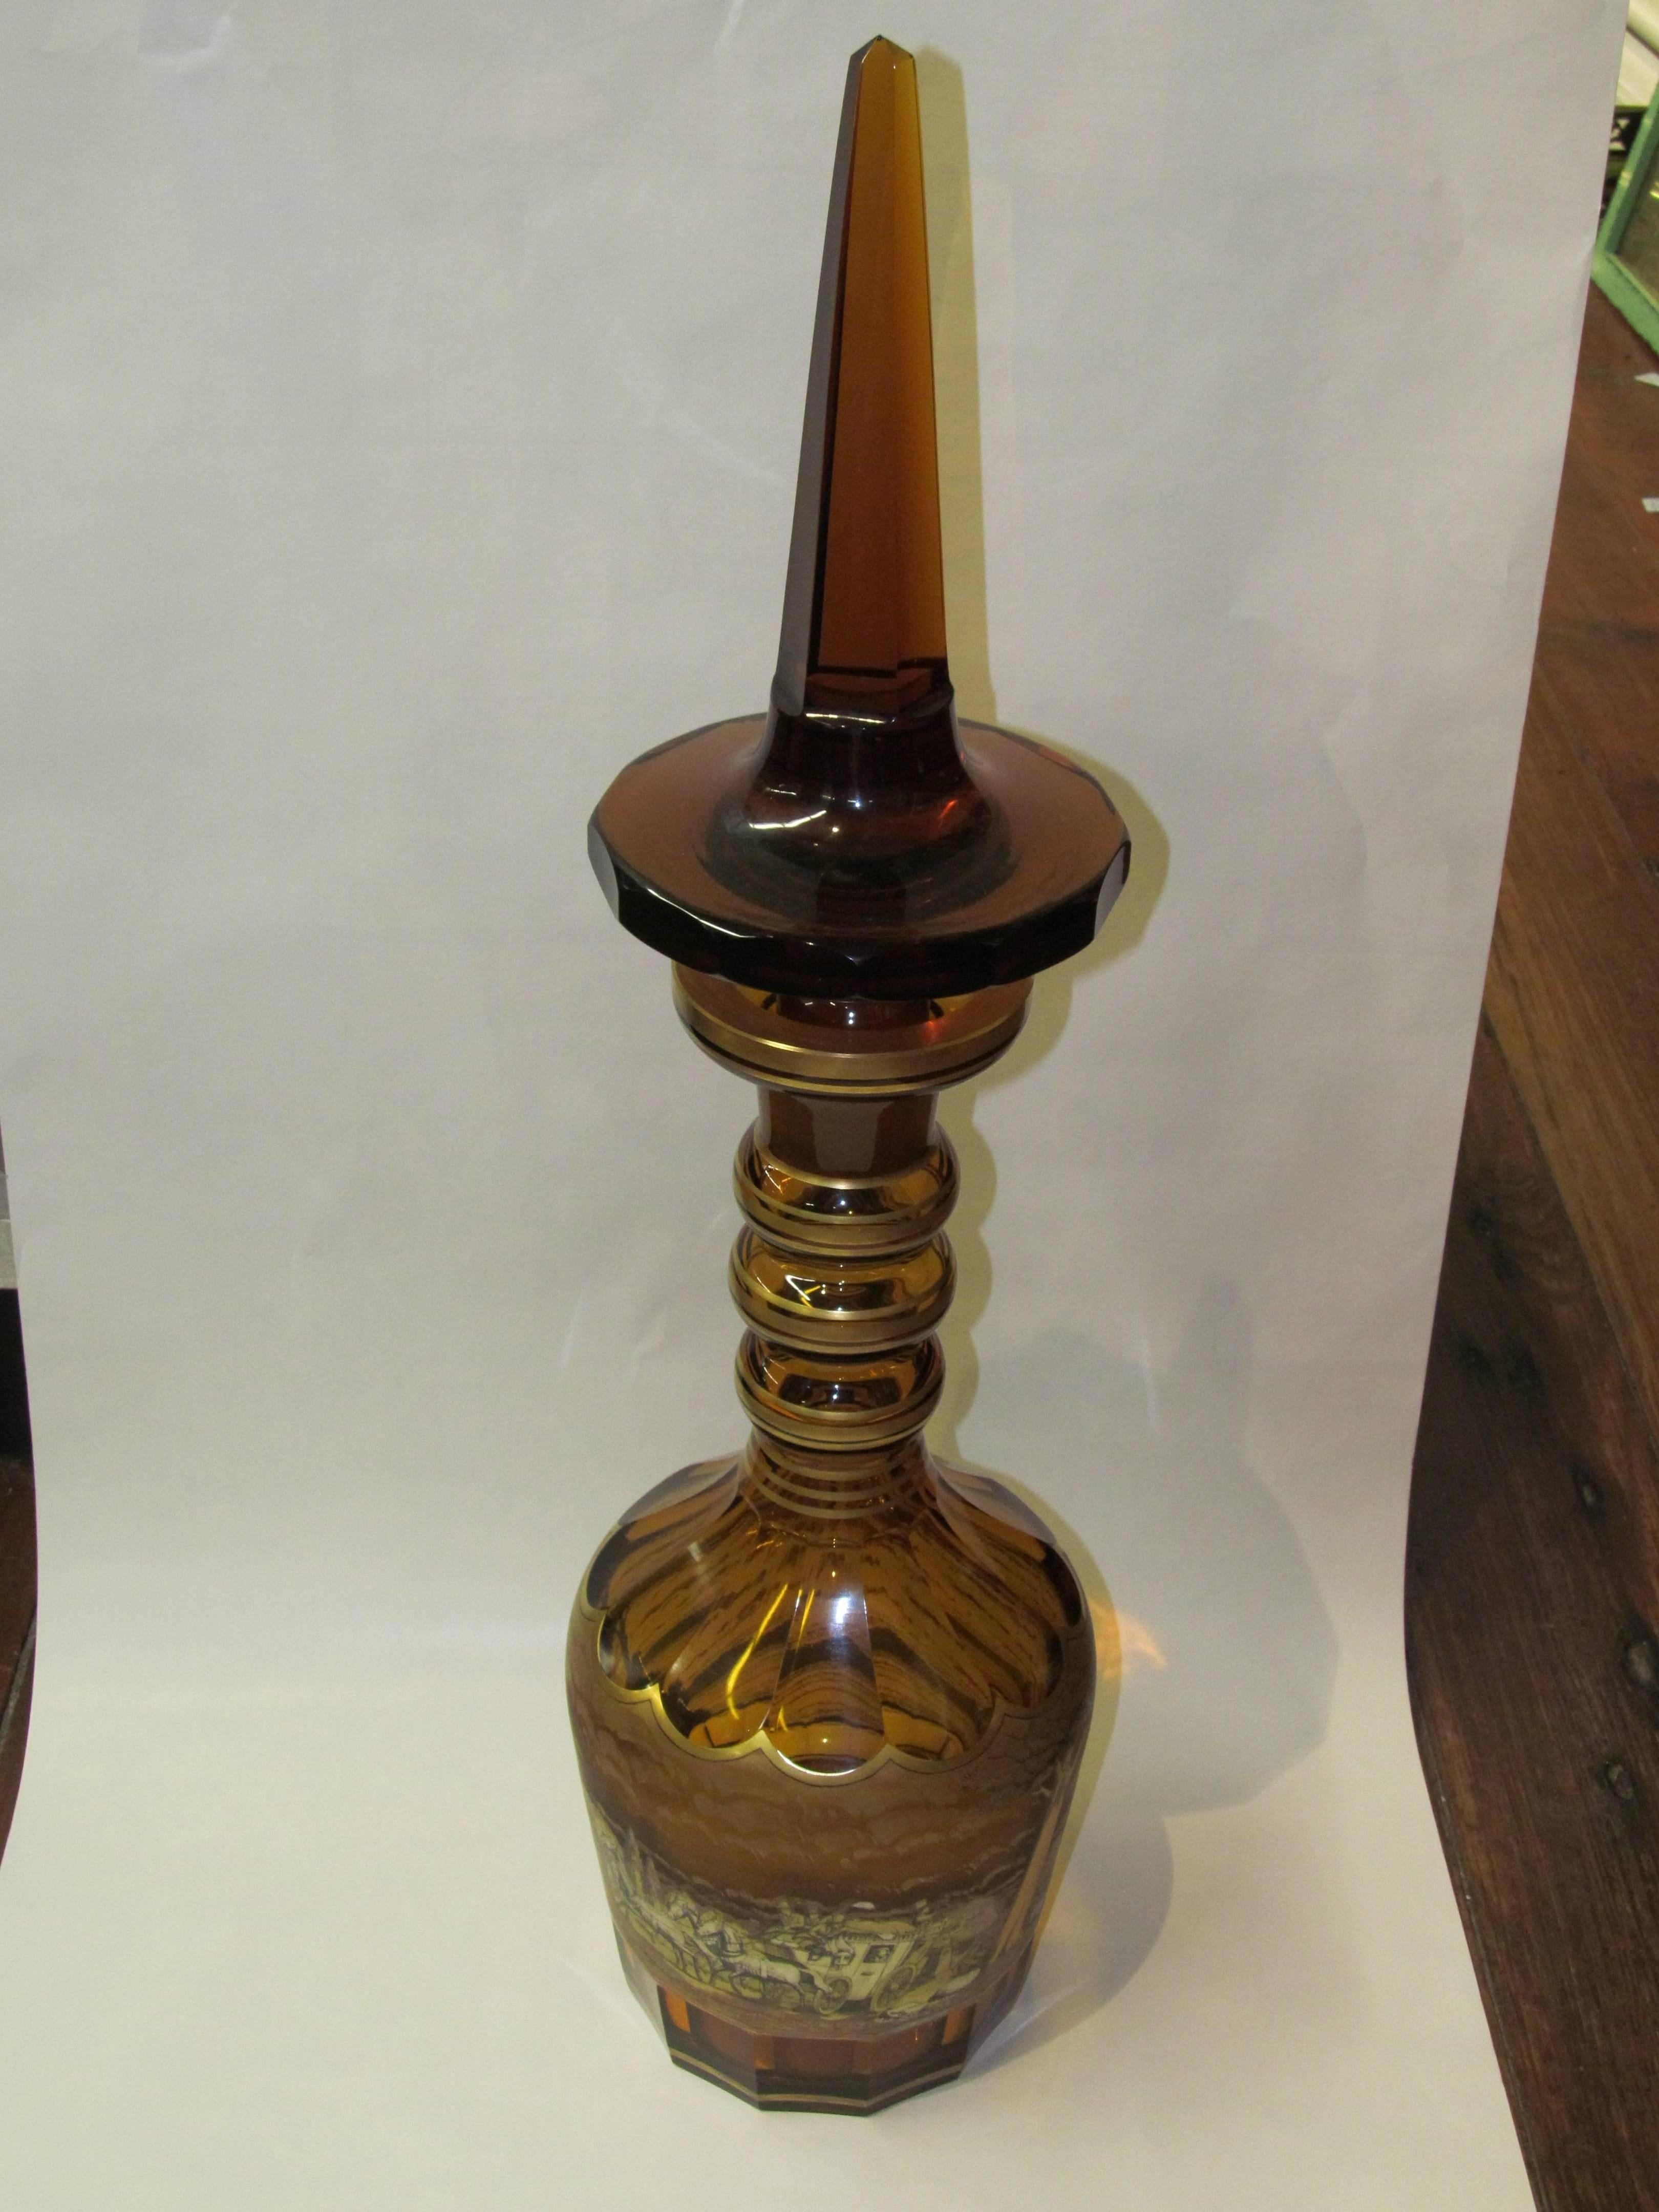 Rare and important old bohemian or Moser amber cut crystal palatial size decanter with hand-painted coach scene, signed by the artist but illegible. This decanter is nearly 30 inches tall with its stopper inserted. It is pristine with no wear